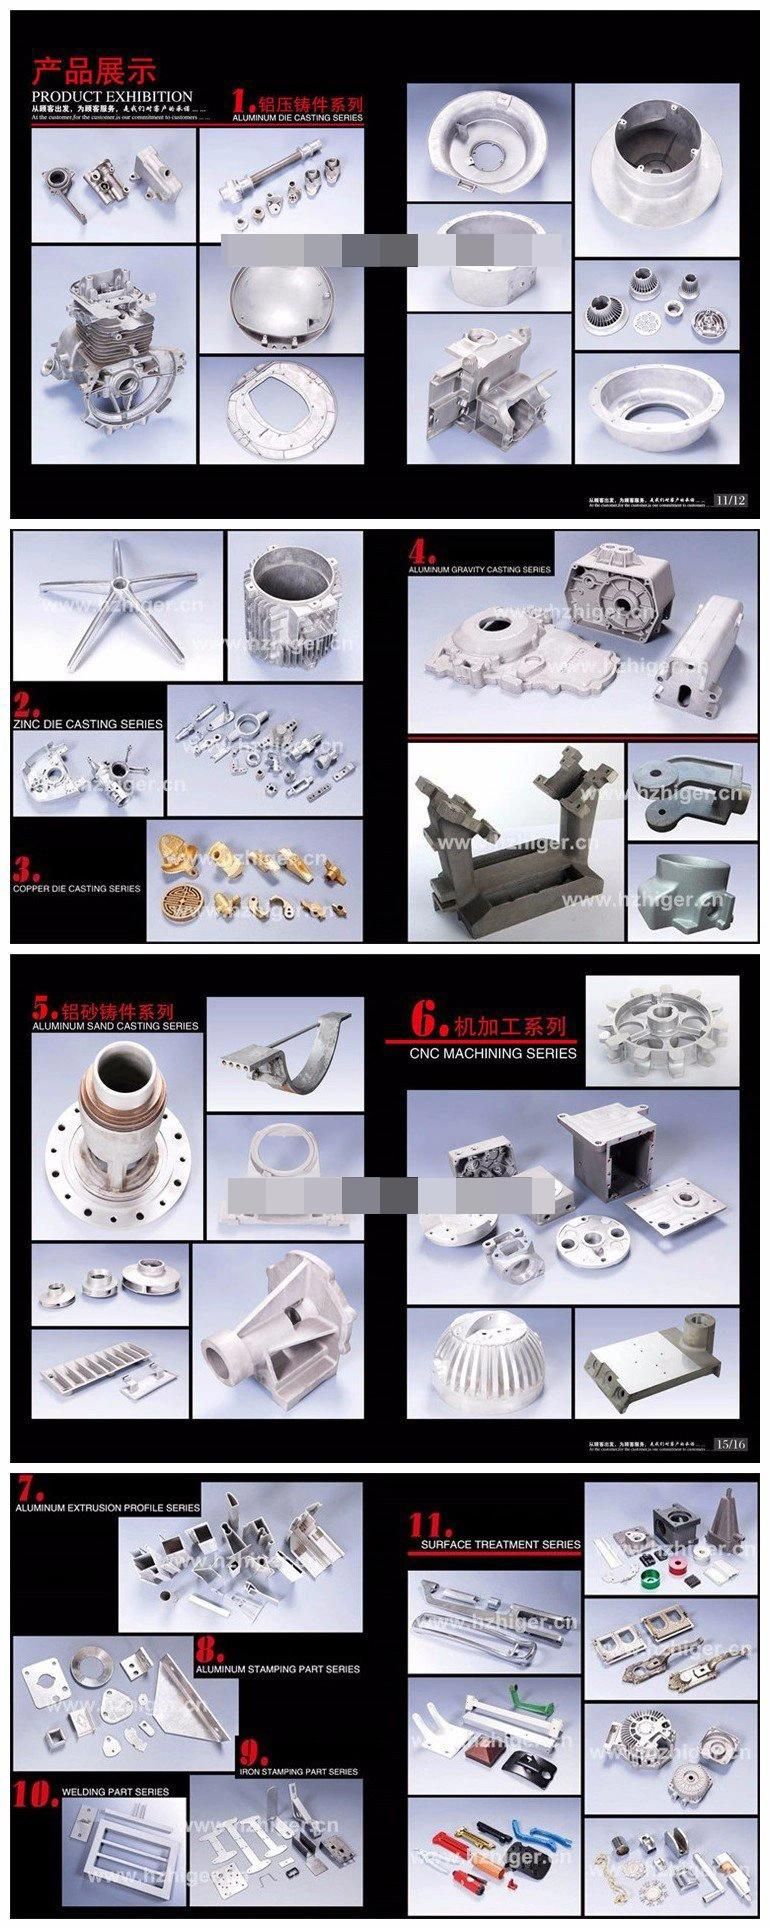 Aluminum Die Casting/ Accurate Large Vechicle Machinery Parts